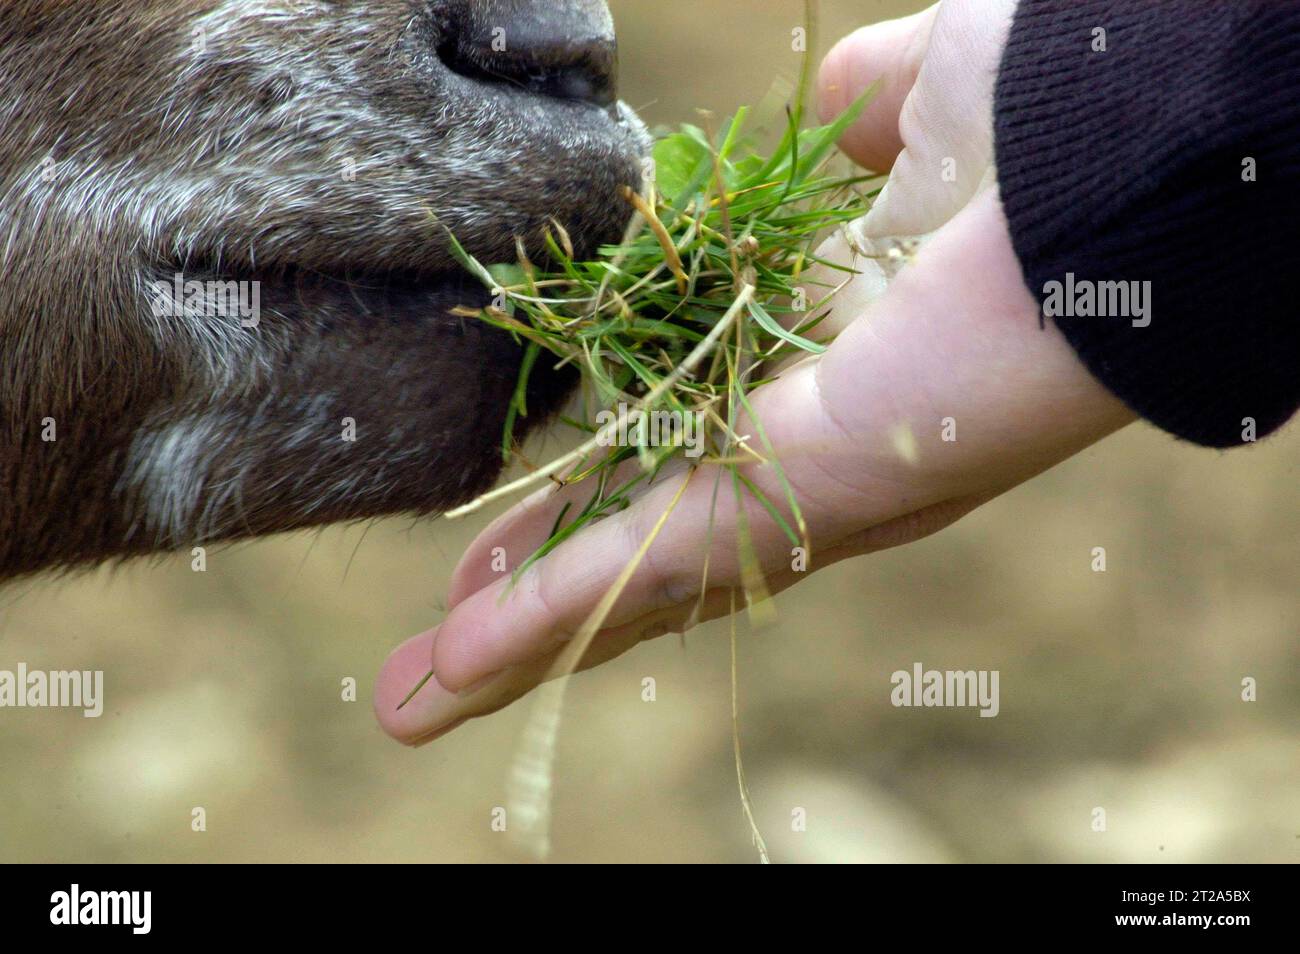 Sheep are important animals in agriculture sheep and their environment Credit: Imago/Alamy Live News Stock Photo